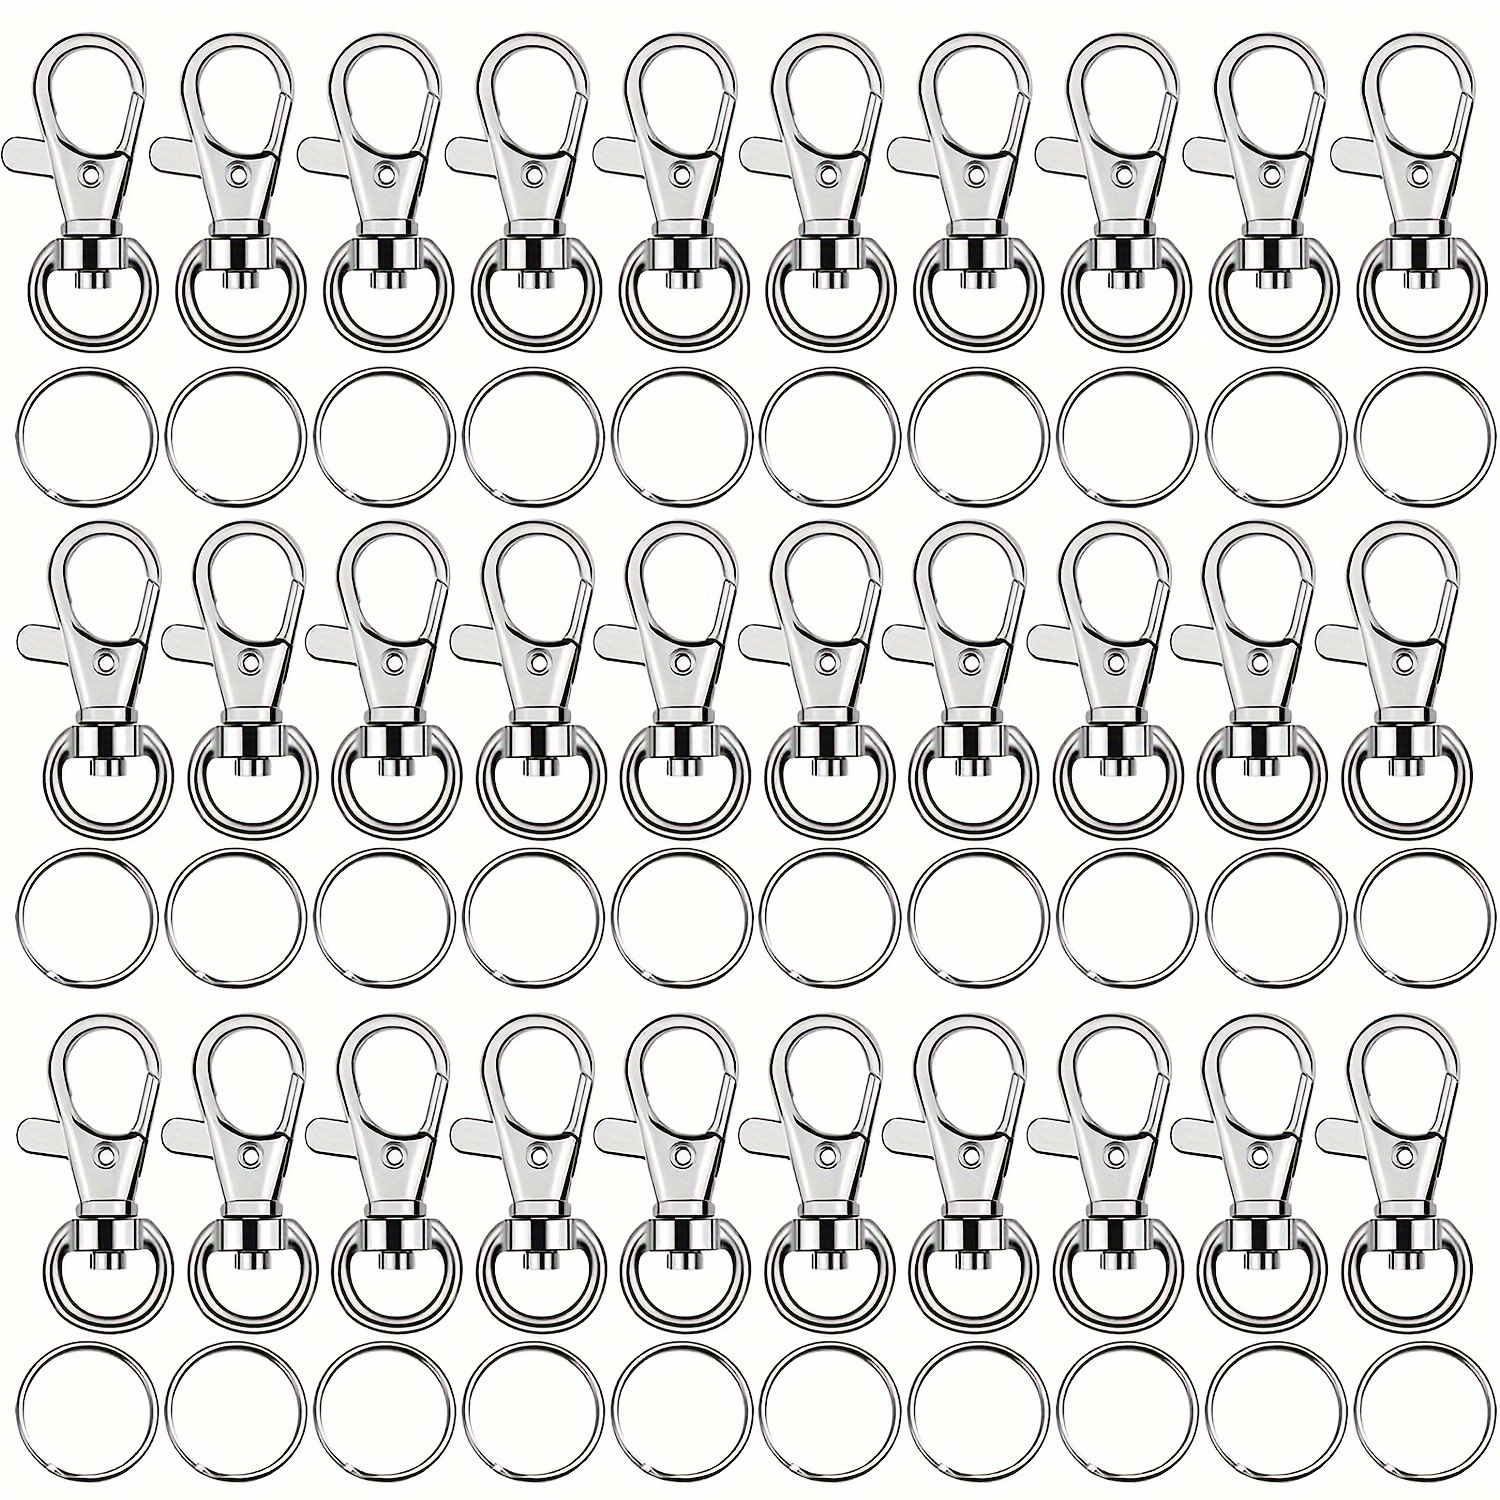 100PCS Premium Swivel Snap Hook Keychains with Key Rings, Metal Keychain  Clip and Key Ring, 50PCS Key Chain Hooks and 50PCS Key Rings for Lanyard  Crafts Jewelry Keychain Making Black 35mm/1.38inches 